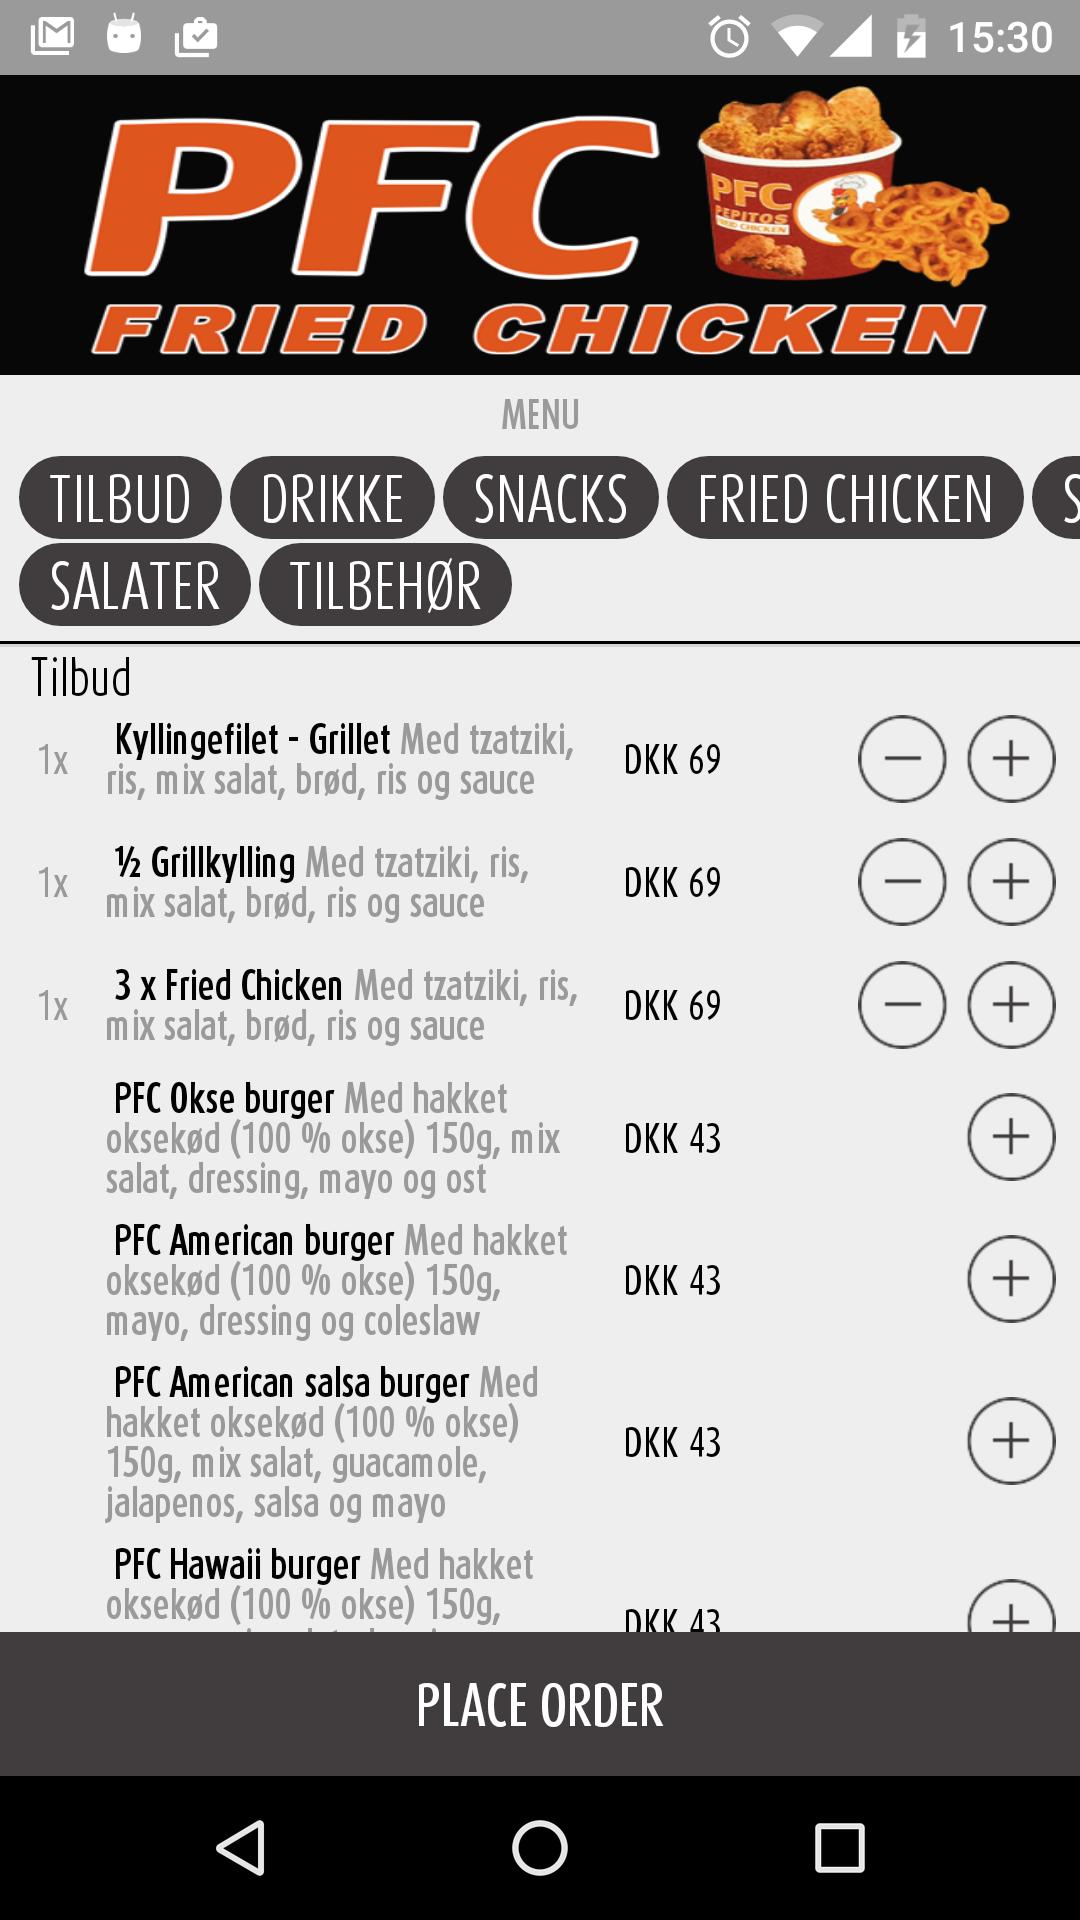 PFC Fried Chicken for Android - APK Download